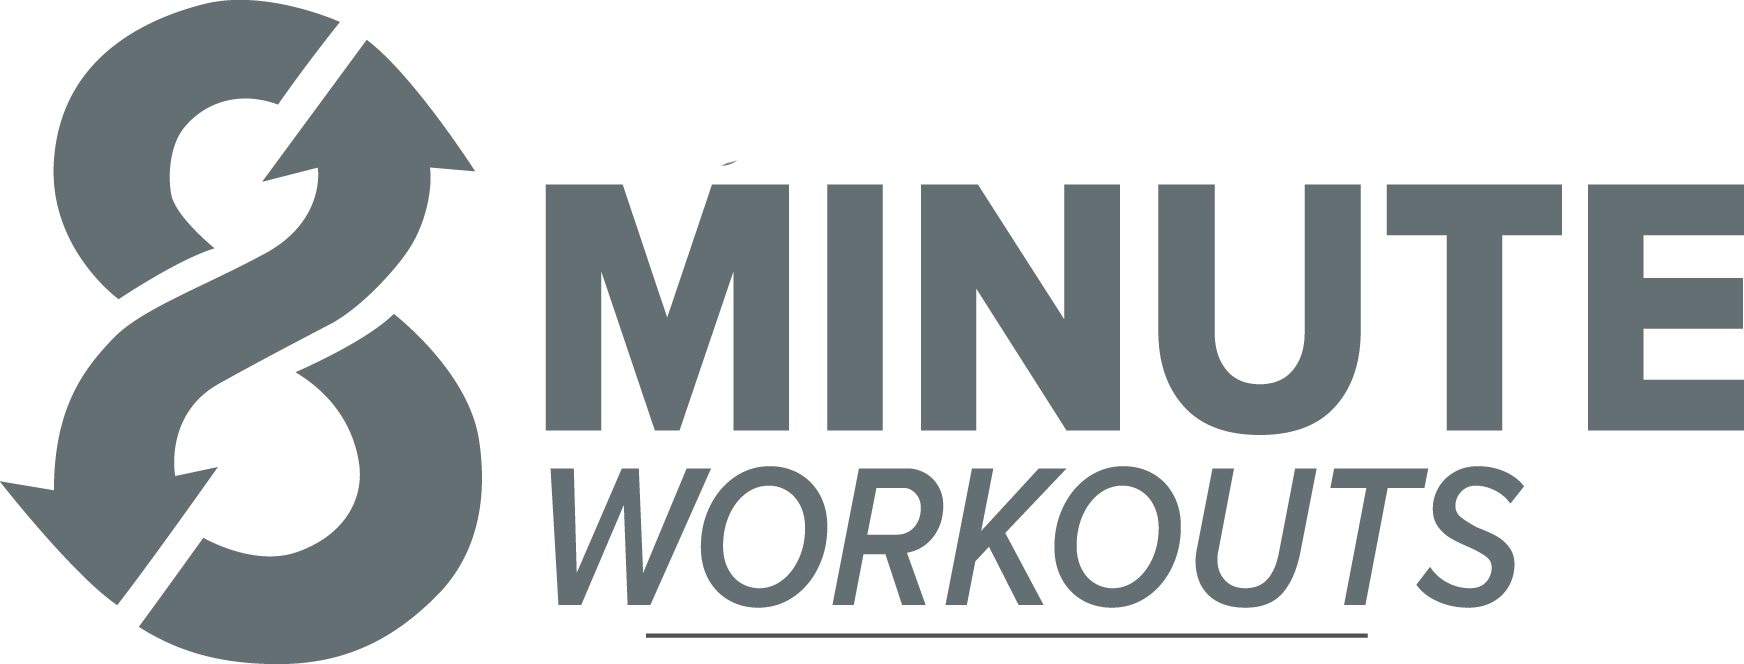 8 Minute Workouts 